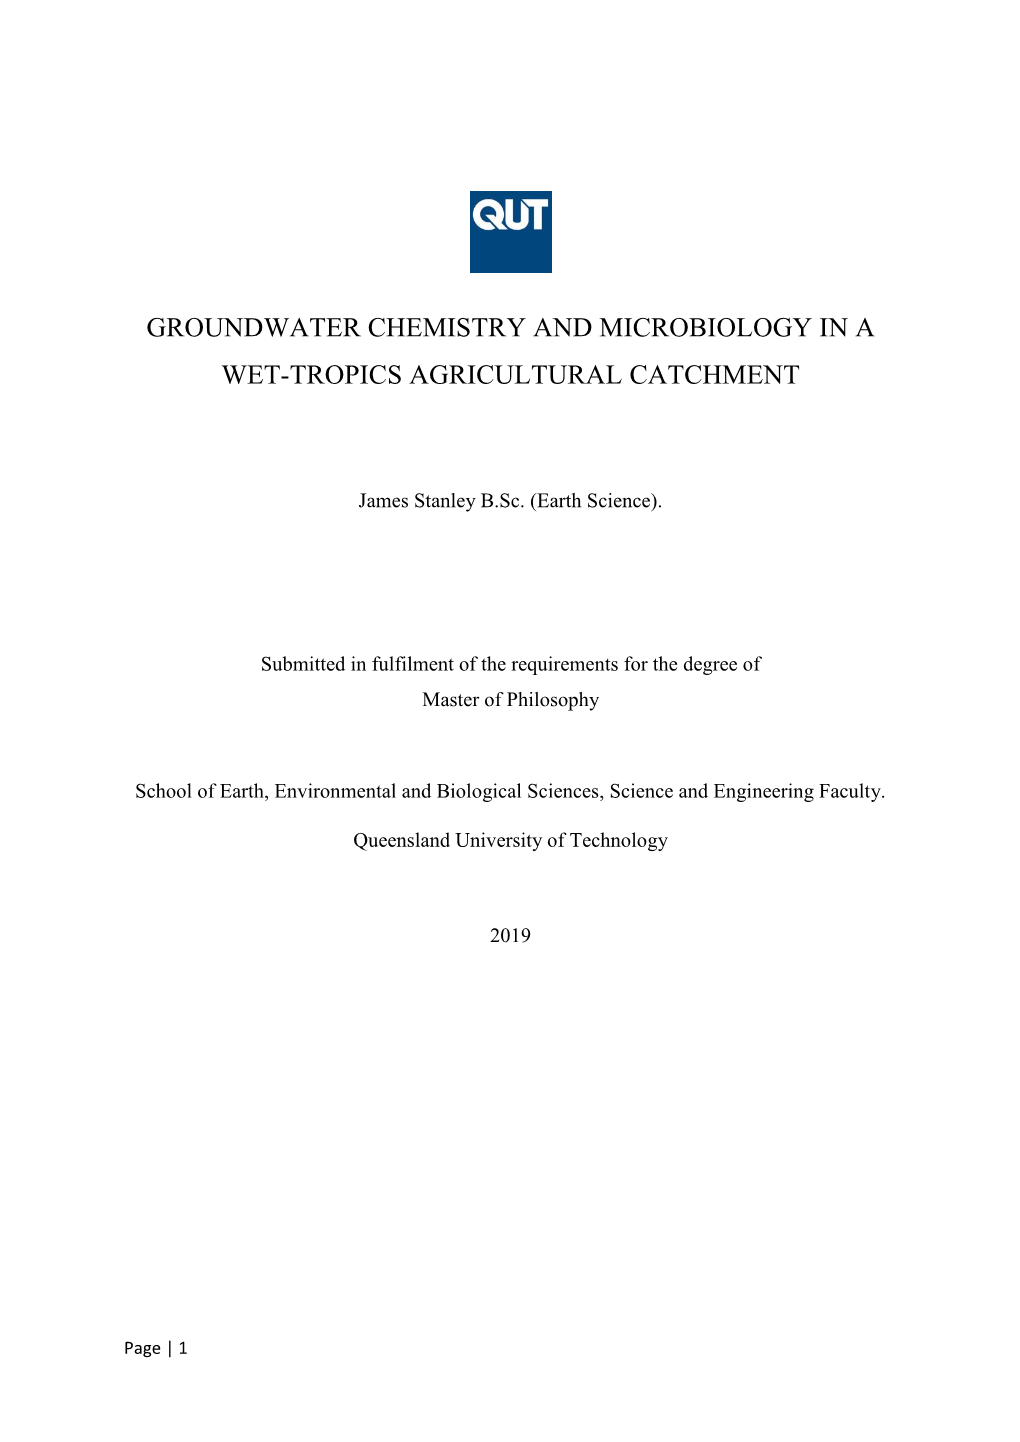 Groundwater Chemistry and Microbiology in a Wet